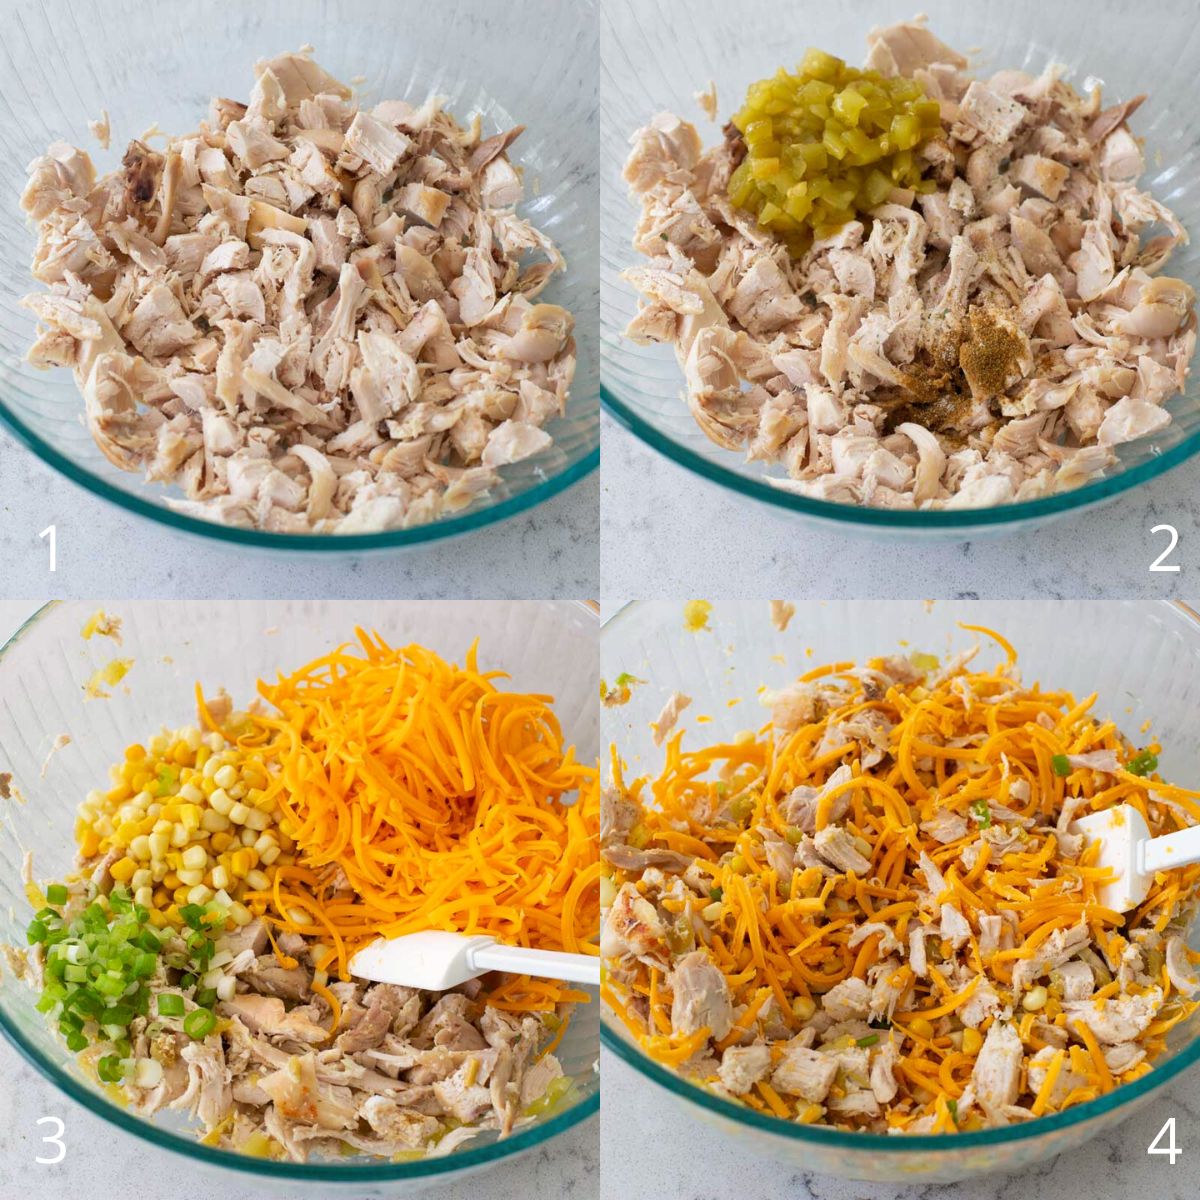 The step by step photos show how to mix the chicken, veggies, and cheese.